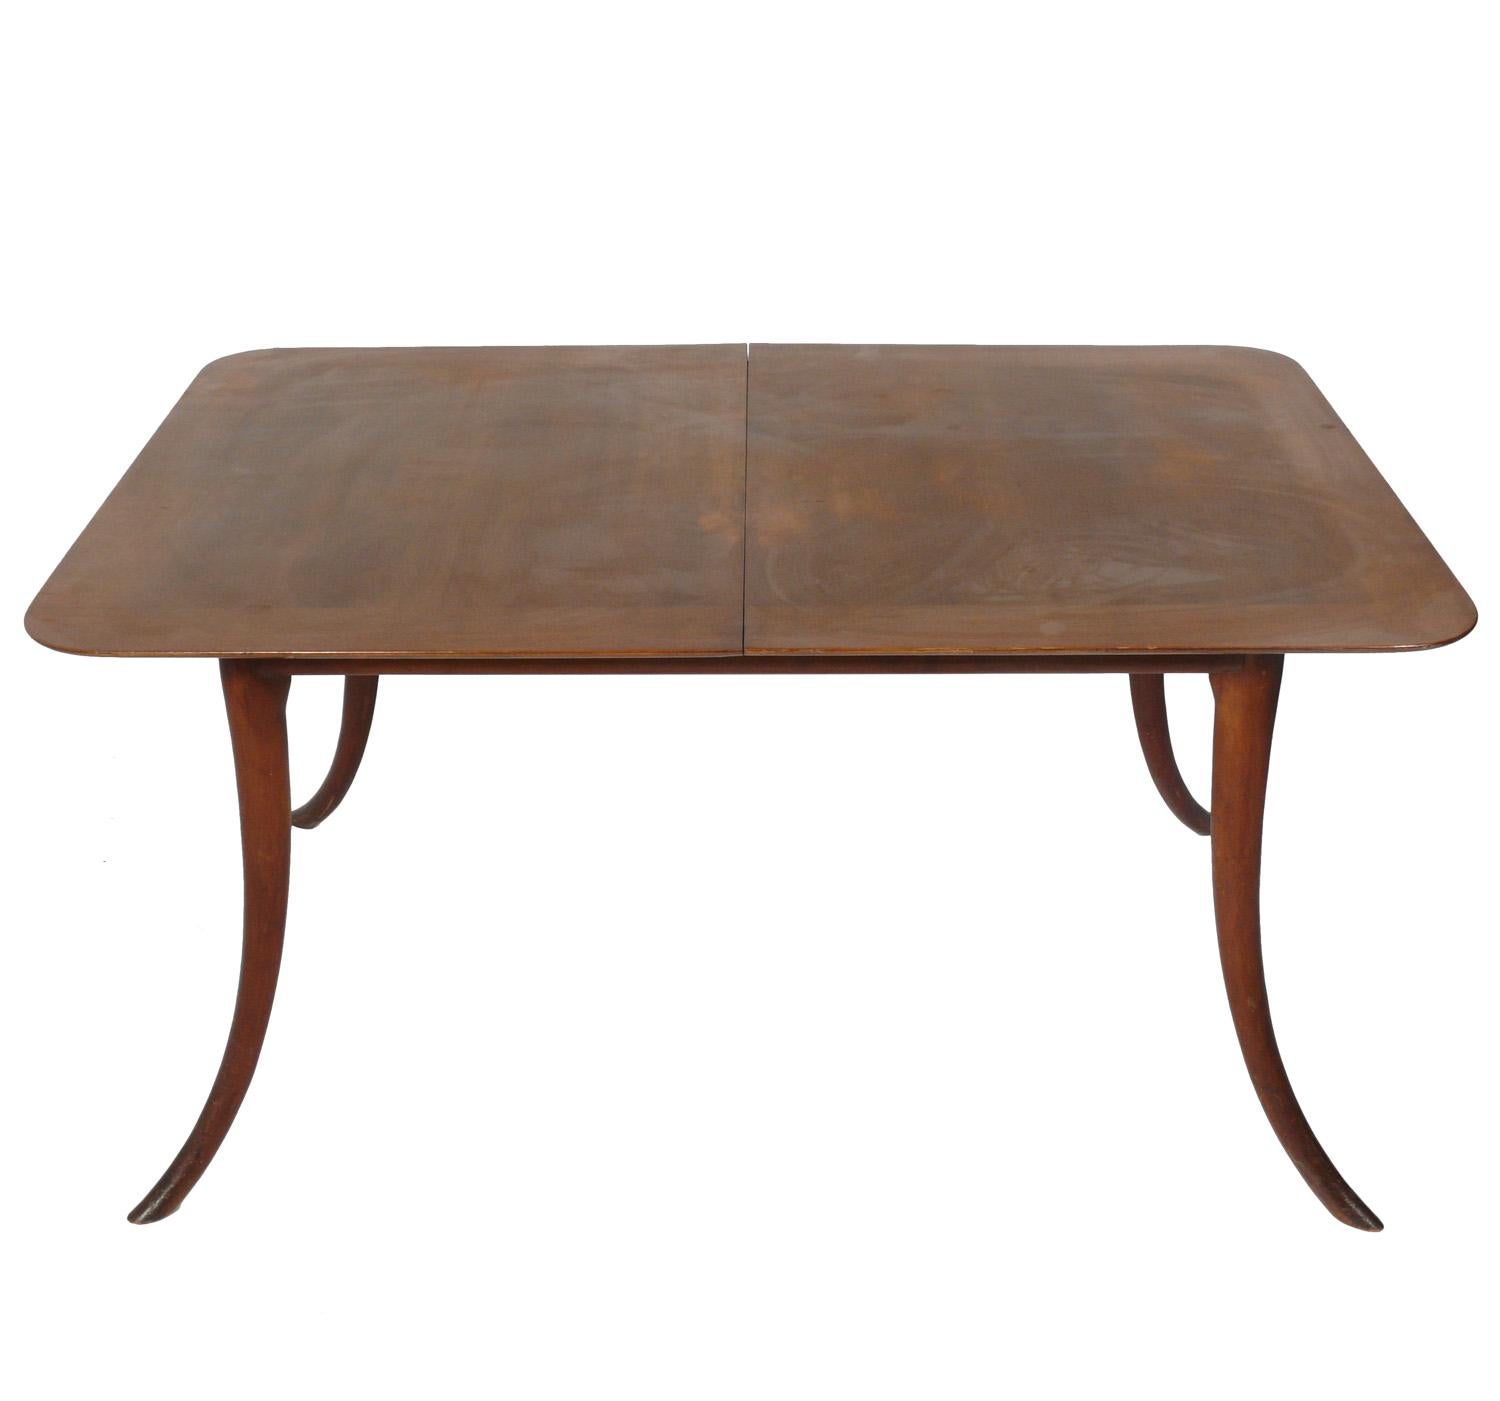 Elegant mid century dining table, designed by T. H. Robsjohn-Gibbings for Widdicomb, American, circa 1950s. Clean lined design with elegant splayed legs. It expands from 58-78